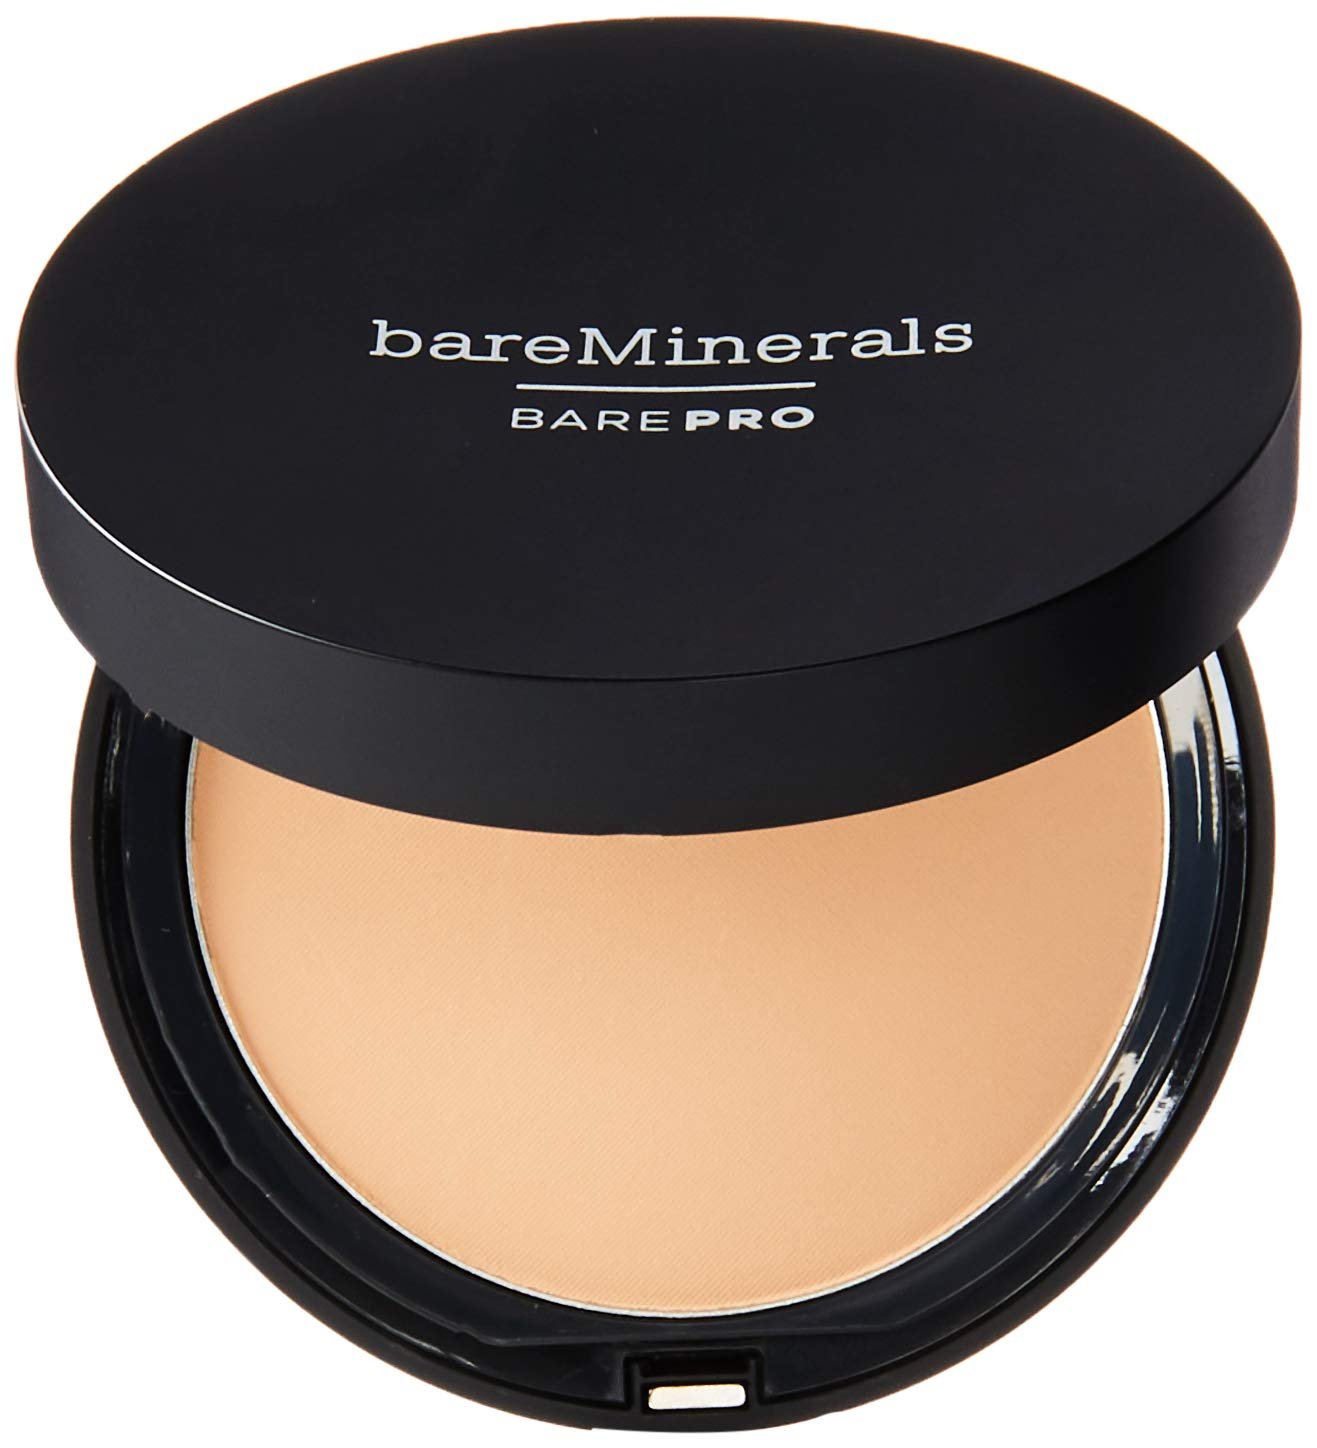 Melt-Proof Foundation That Can Stand Up to Summer’s Hottest Temps